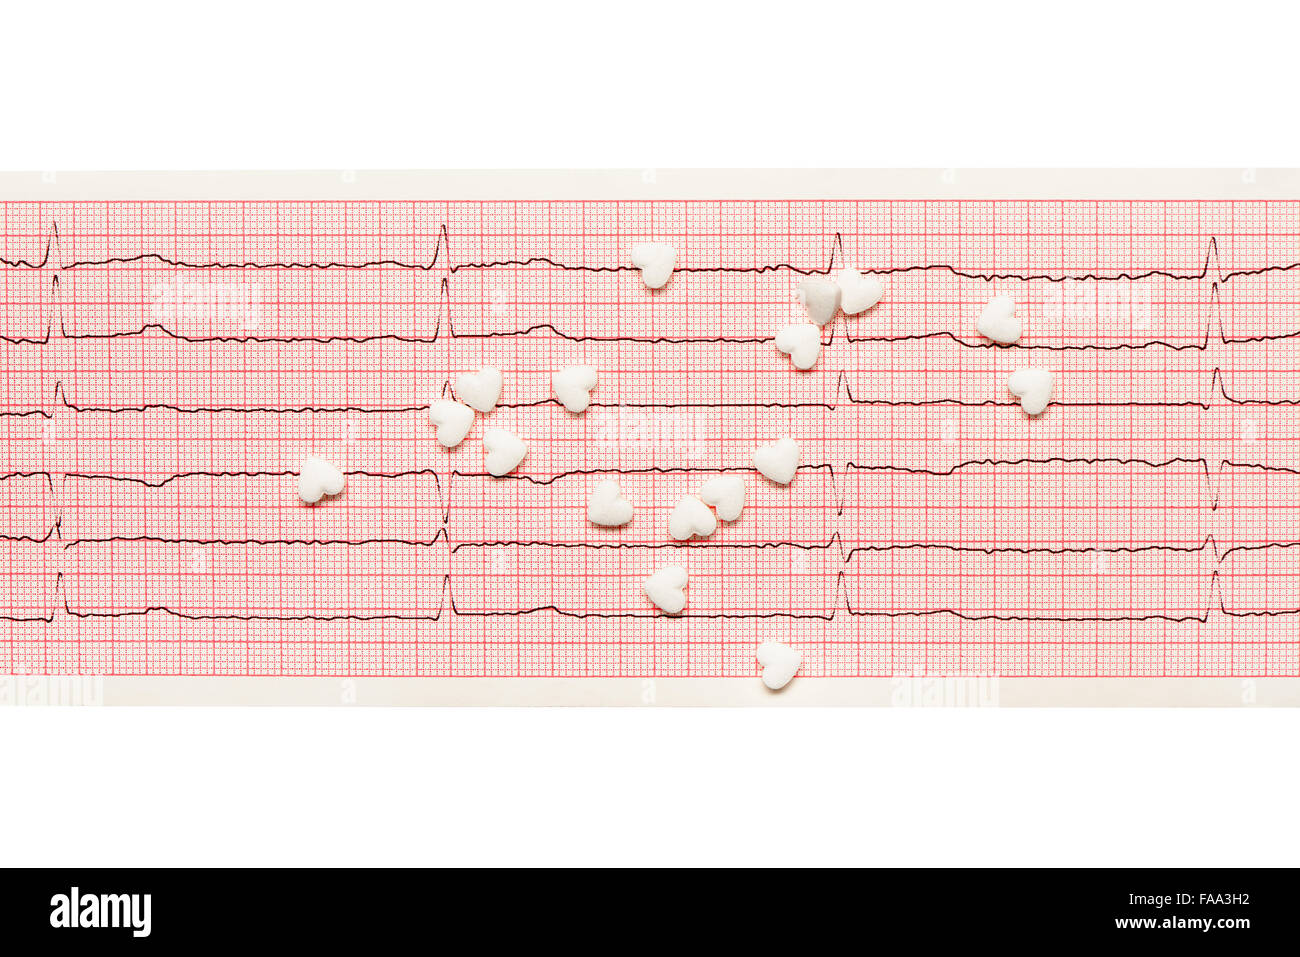 White heart shape tablets on paper ECG results isolated on white background. Clipping path included. Stock Photo